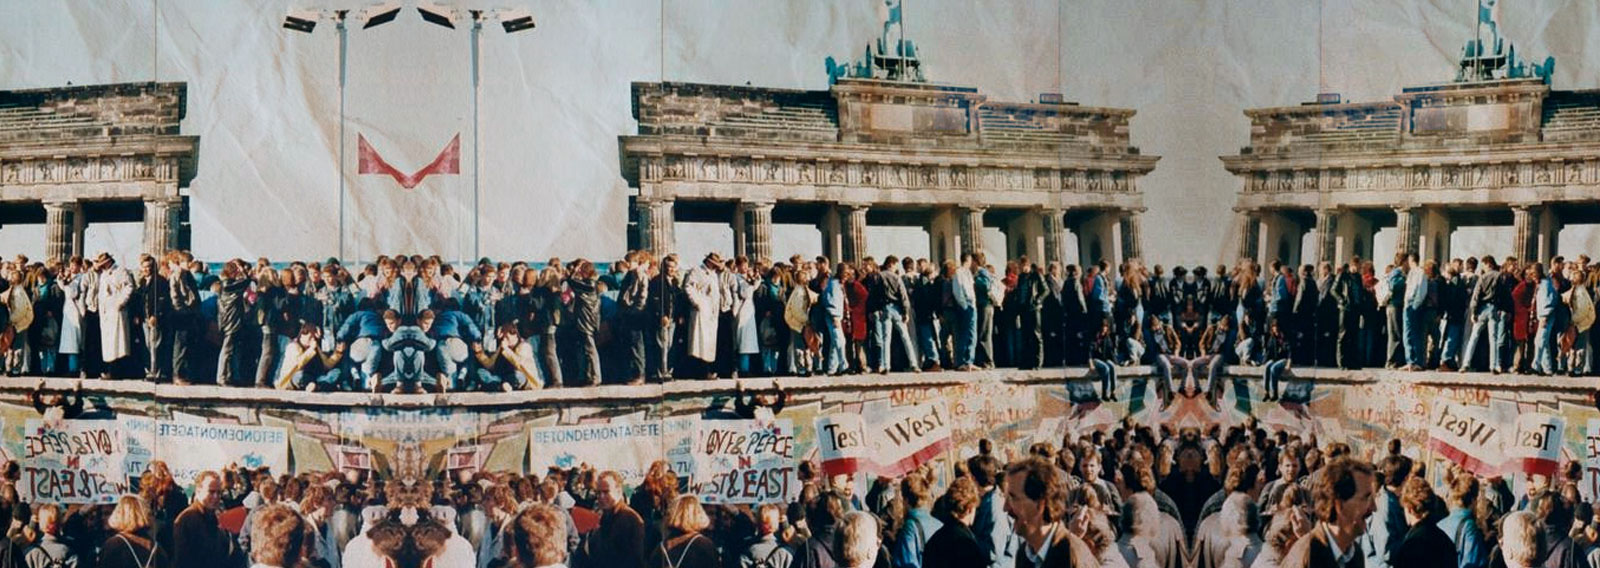 1989: One of the Most Incredible Years of Political Upheaval